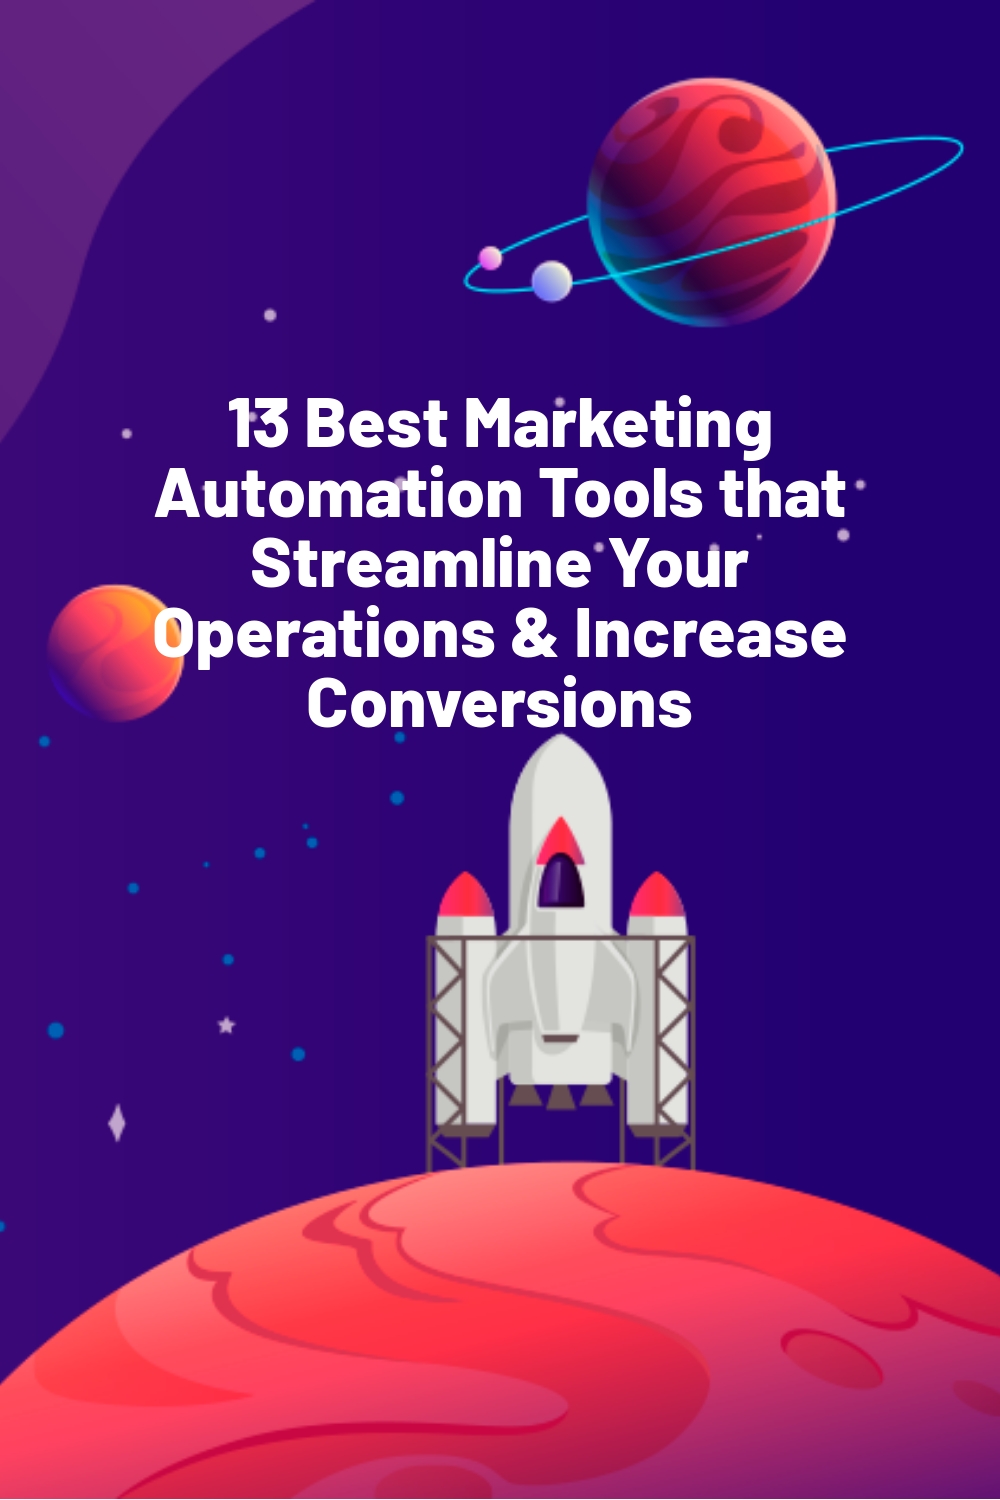 13 Best Marketing Automation Tools that Streamline Your Operations & Increase Conversions